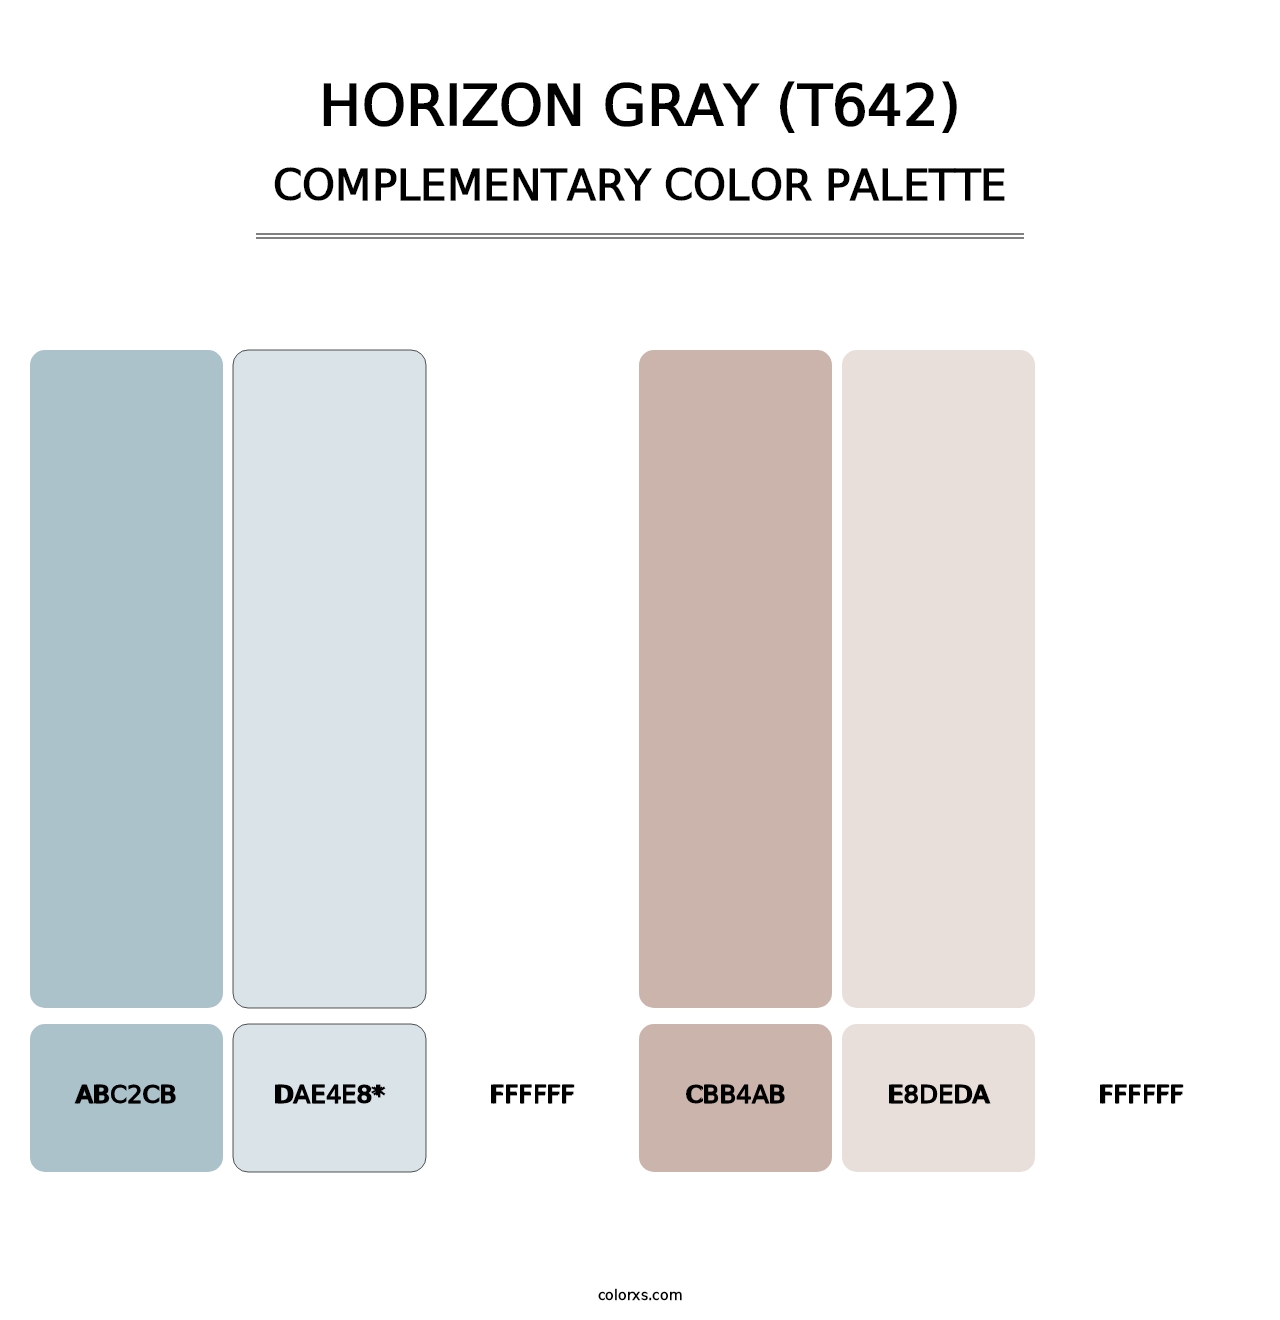 Horizon Gray (T642) - Complementary Color Palette